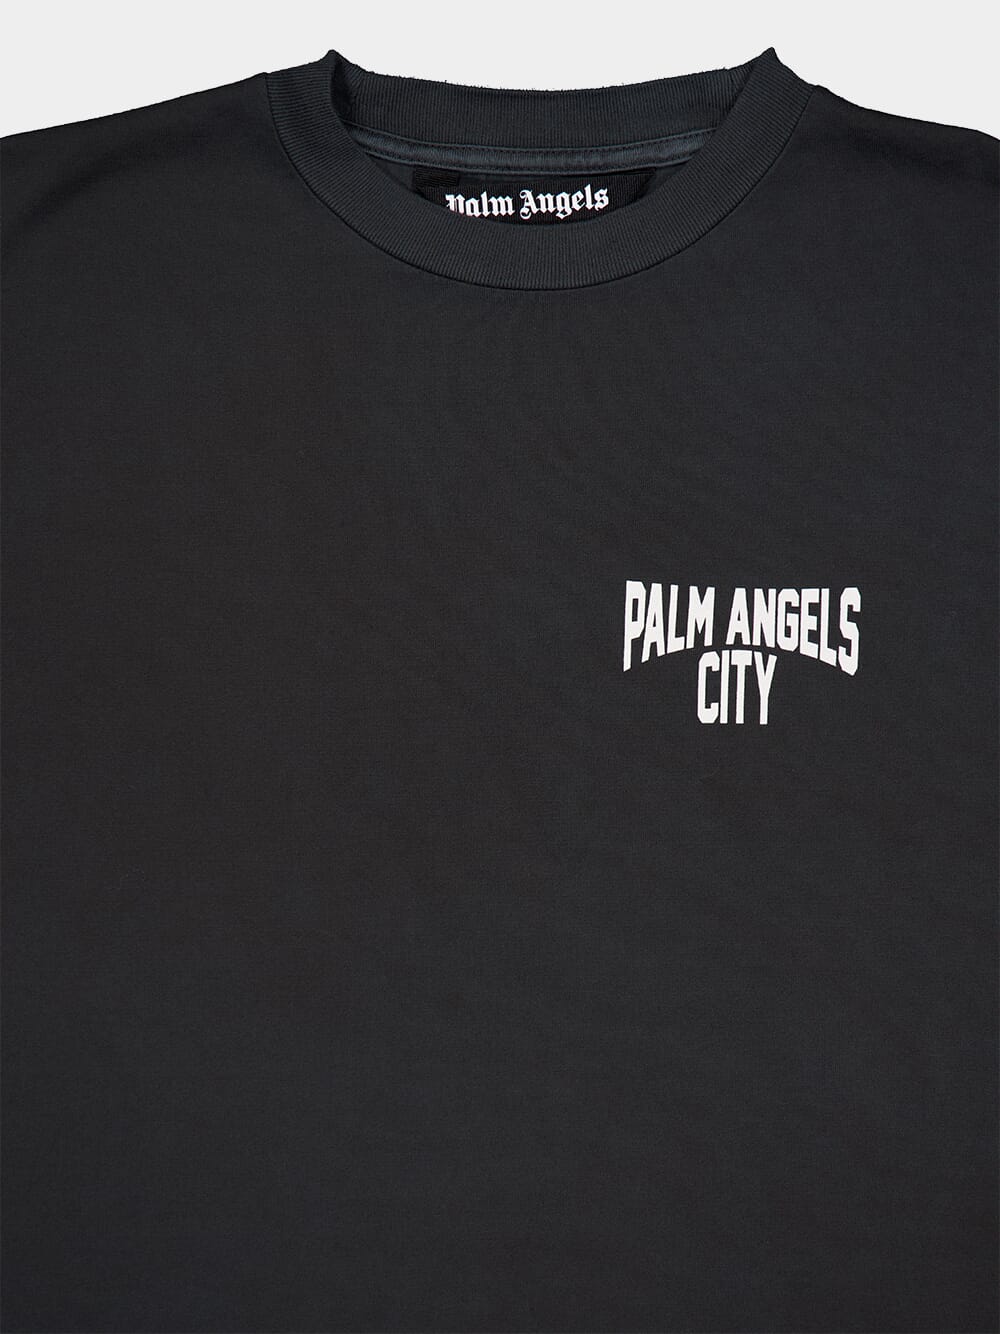 Palm AngelsCity Washed Tee at Fashion Clinic